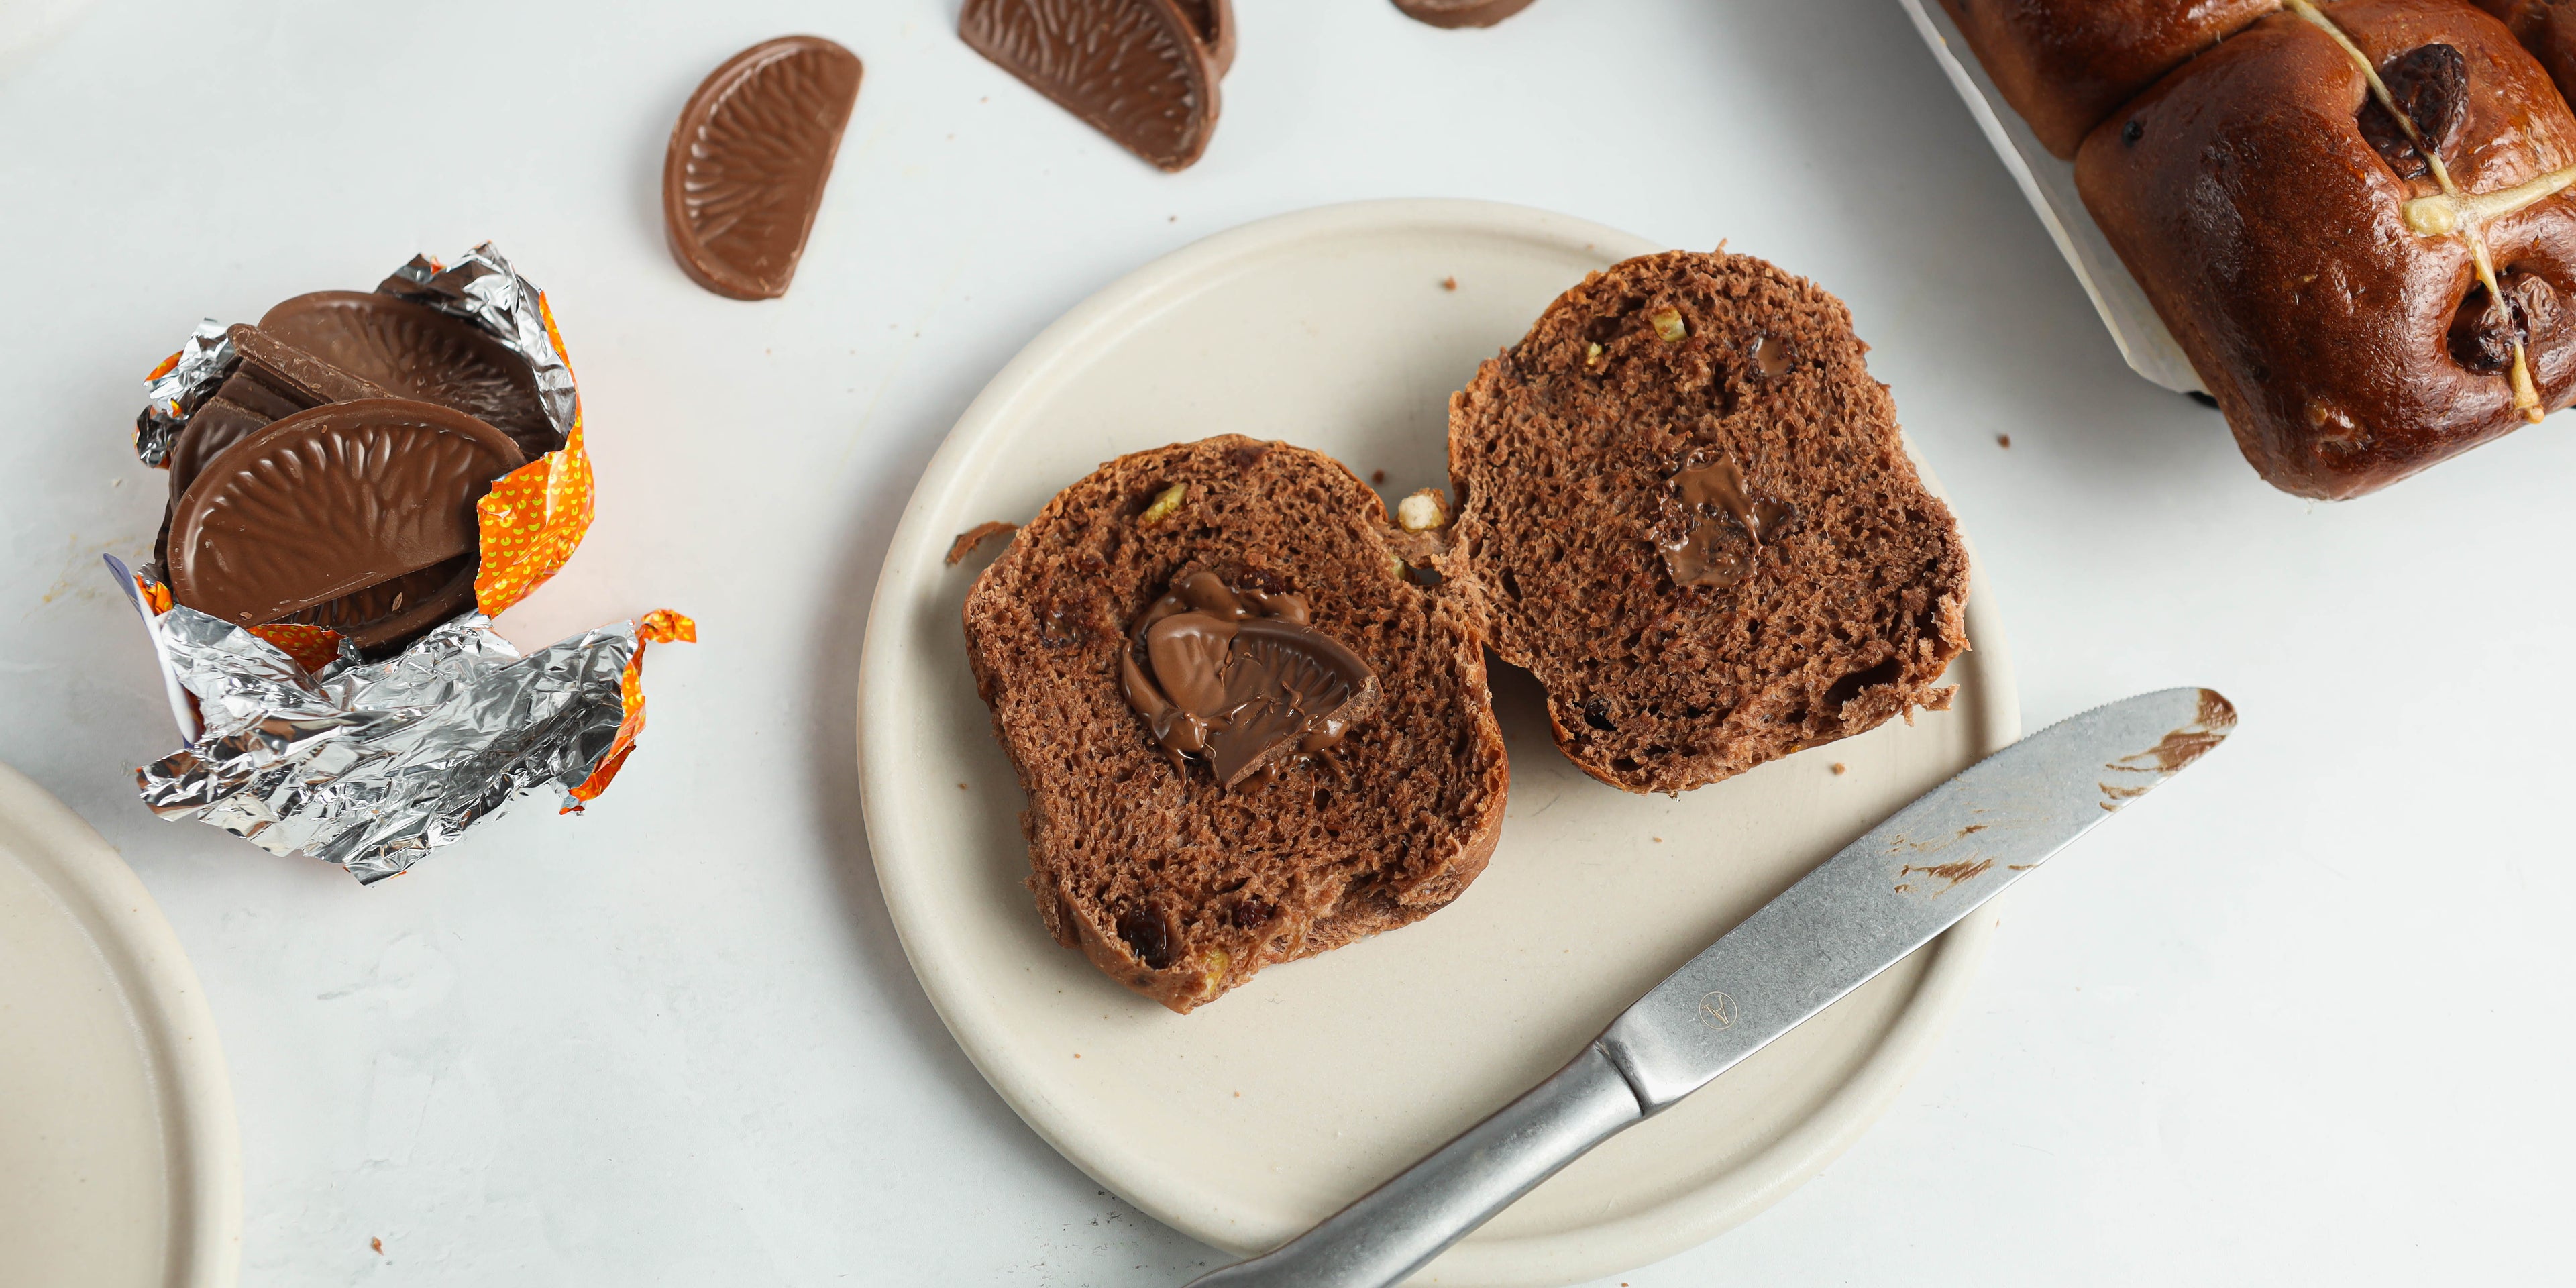 Close up of a Chocolate Hot Cross Bun sliced into halves, next to a knife ready to butter with an opened Terrys Chocolate Orange